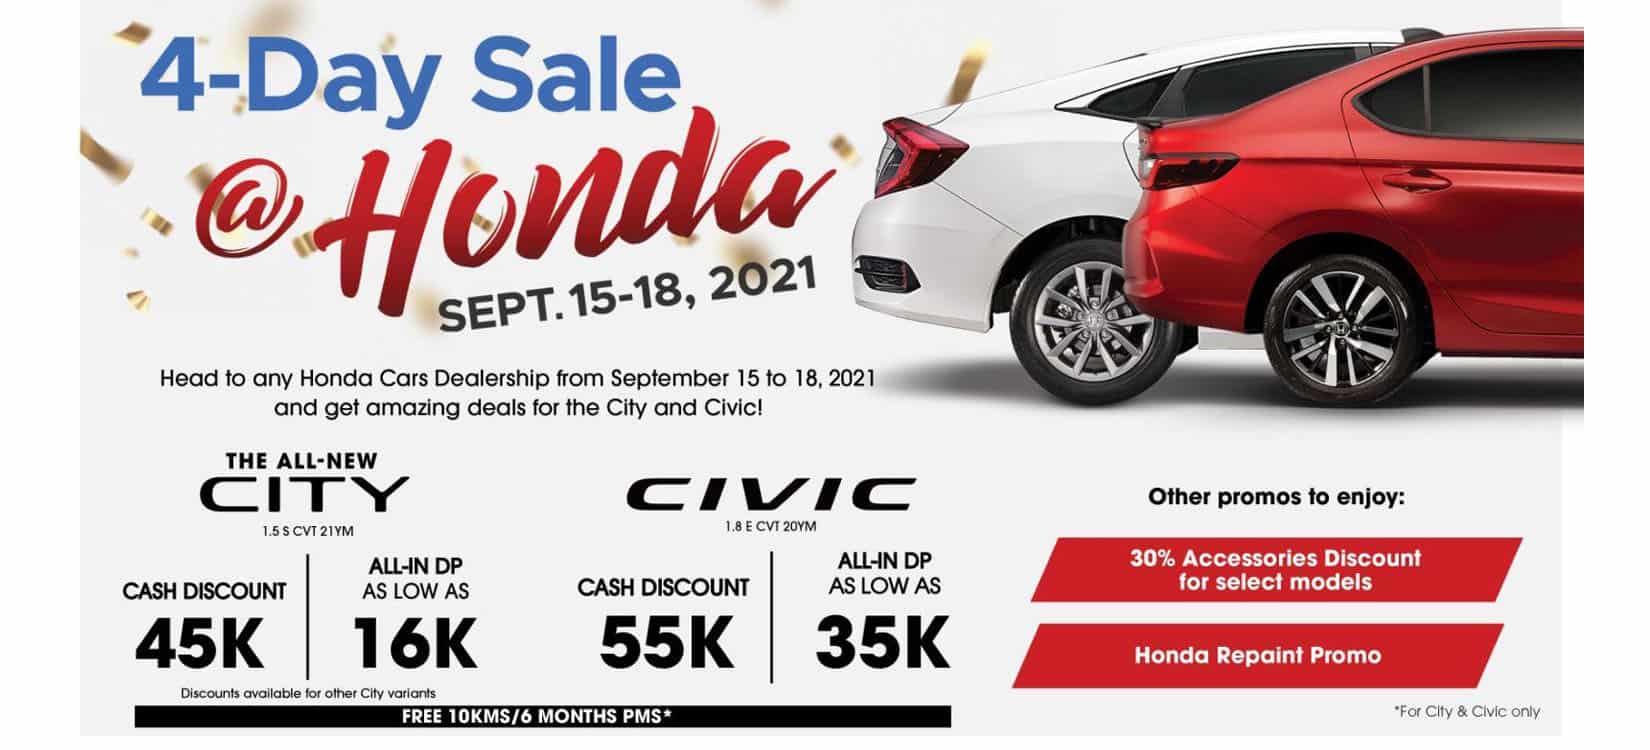 Honda releases all exclusive deals and additional discounts under 4-Day Sale